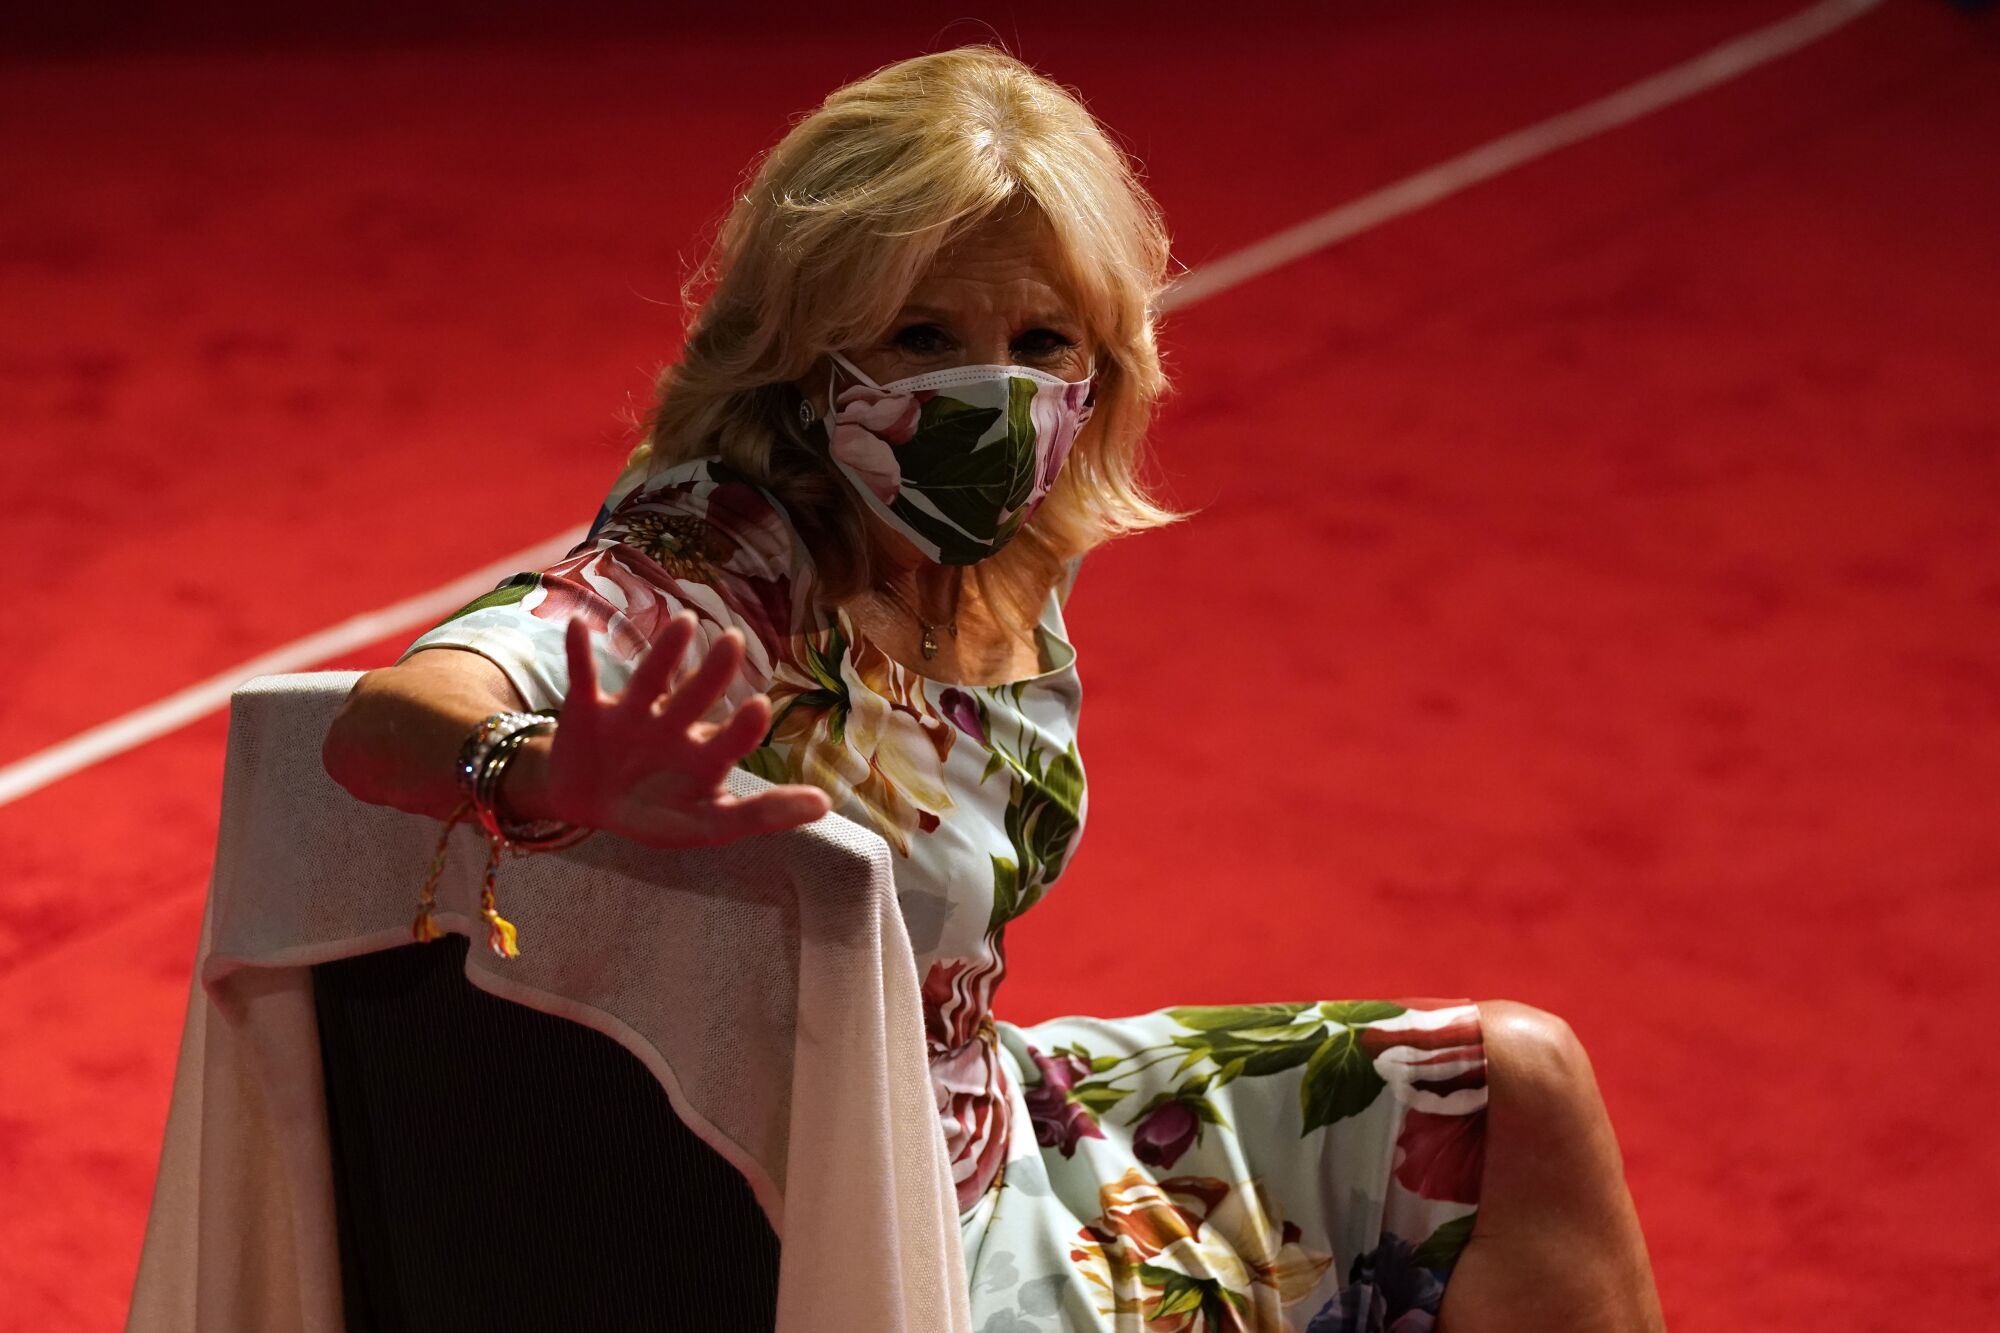 Jill Biden, wearing a floral mask that matches her dress, sits in a chair in the debate hall